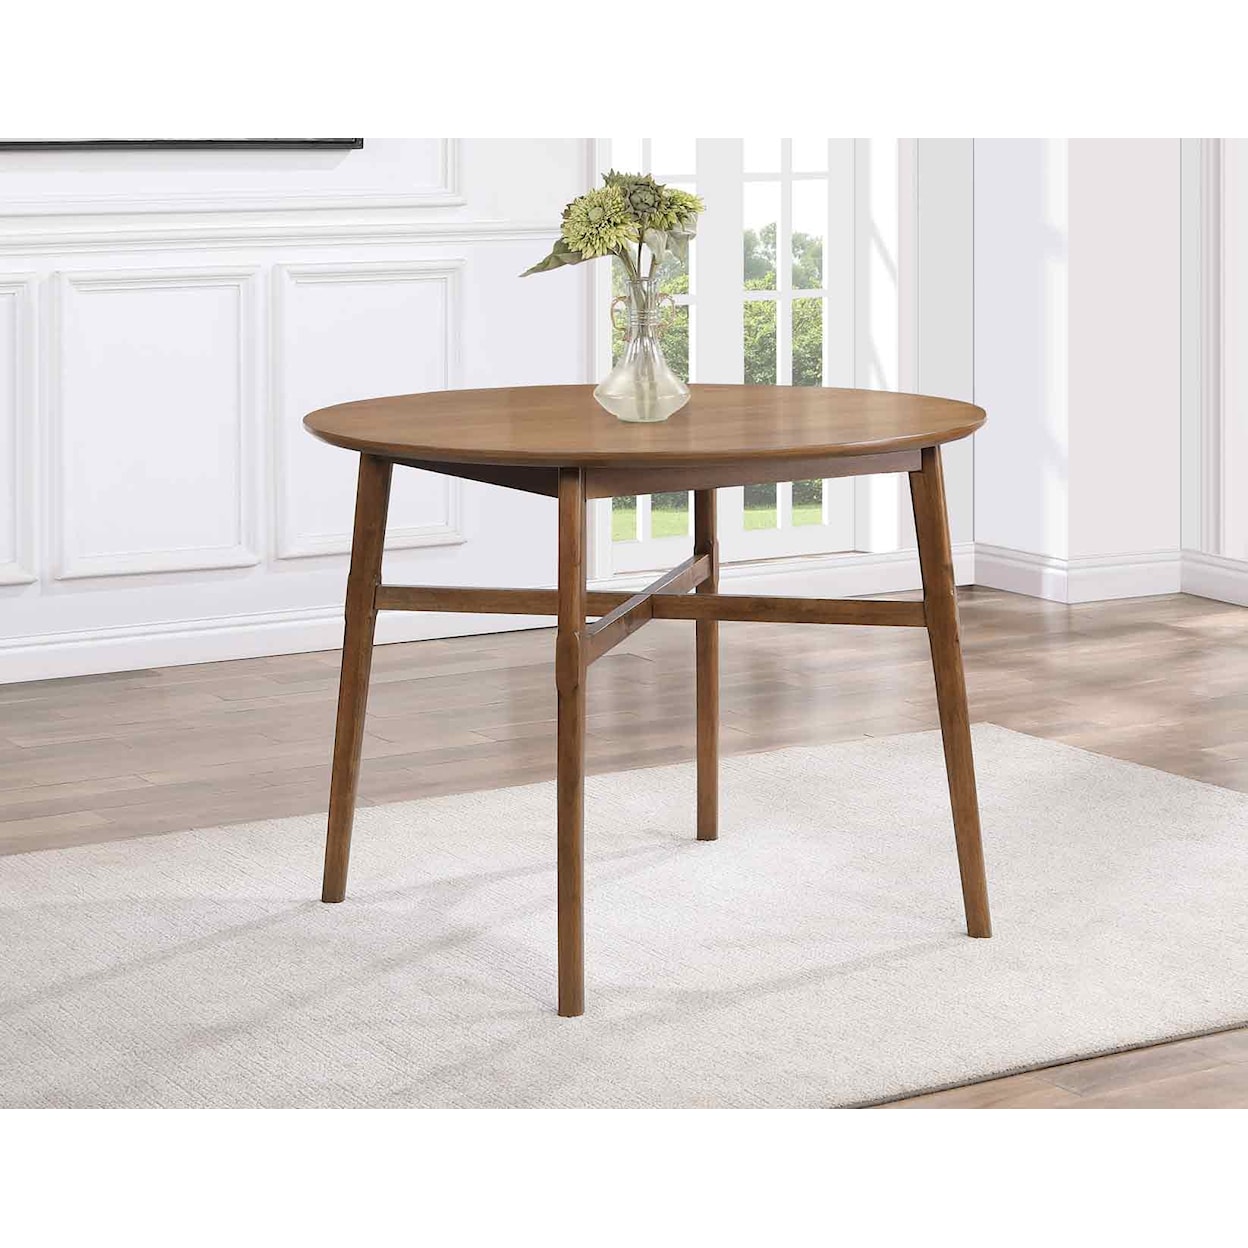 Steve Silver Oslo 46-Inch Round Counter Table